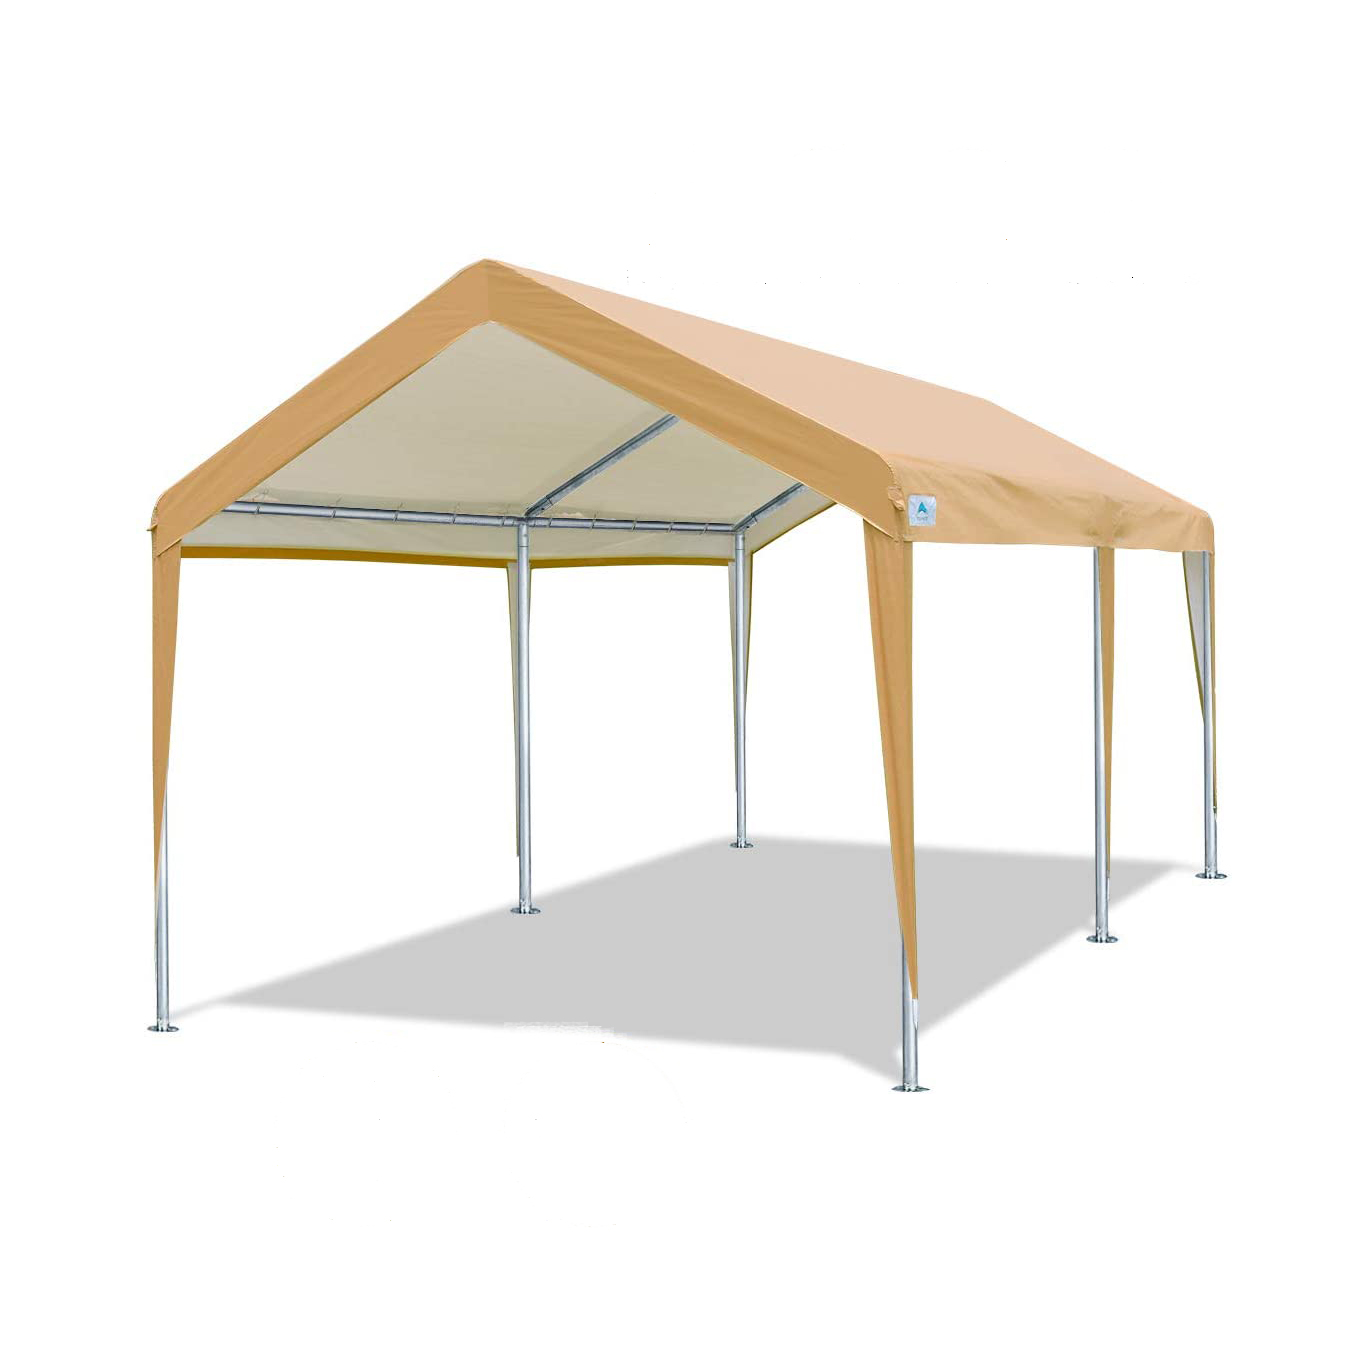 Heavy Duty 10/'x20/' Outdoor Canopy Shelter Popup Shed Garage Carport Storage Tent